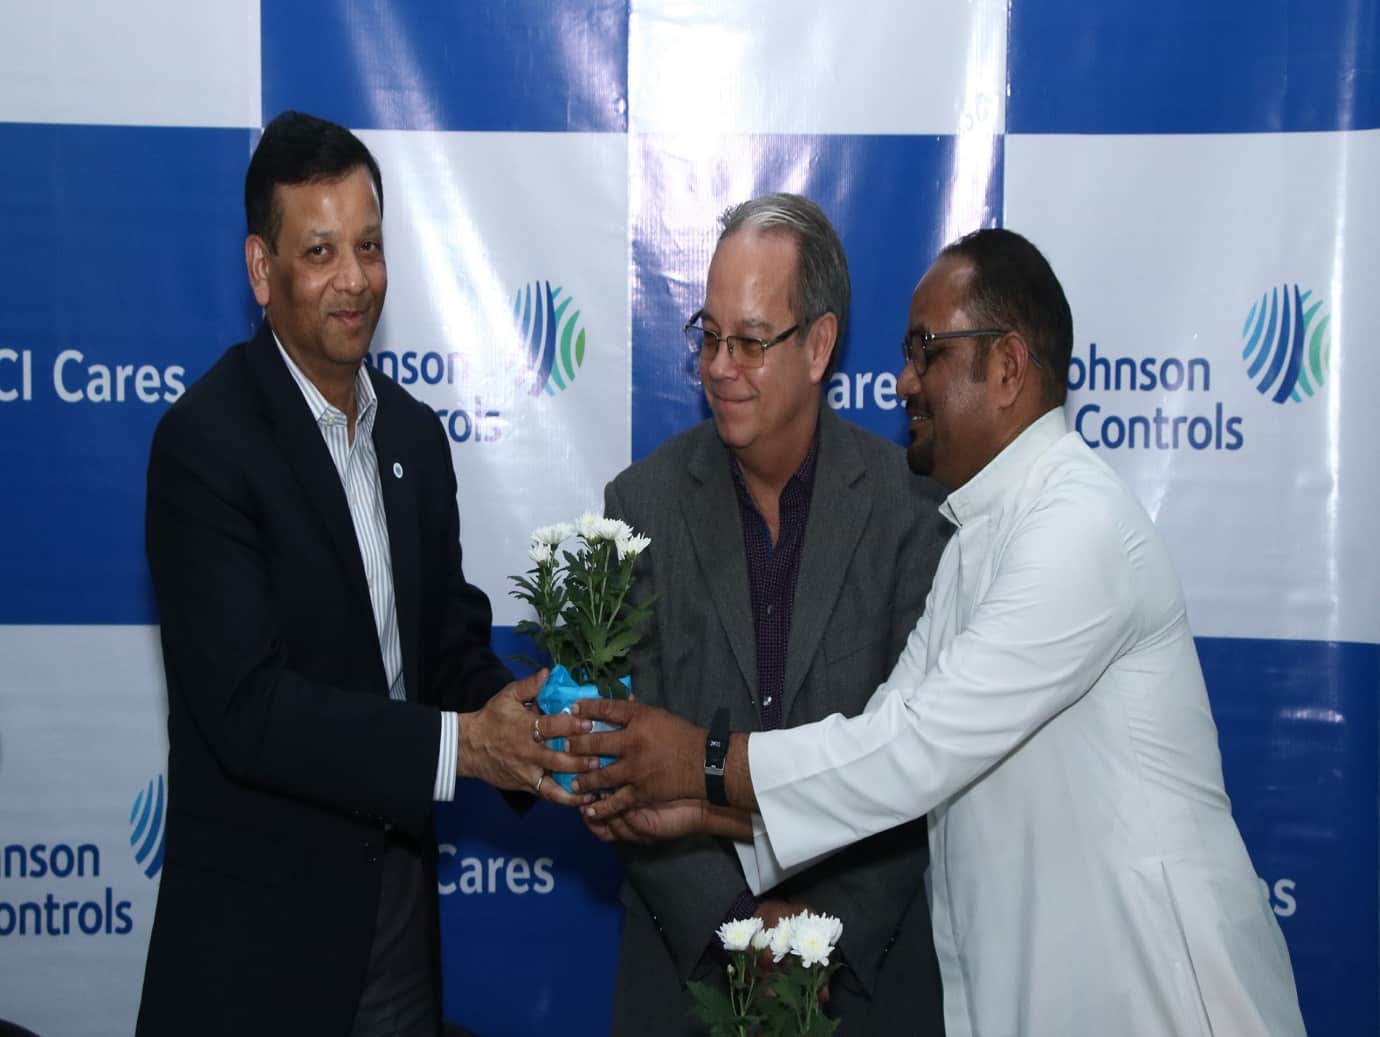 Pune Business Center donates 40 laptops to Don Bosco College as part of the Johnson Controls CCPP